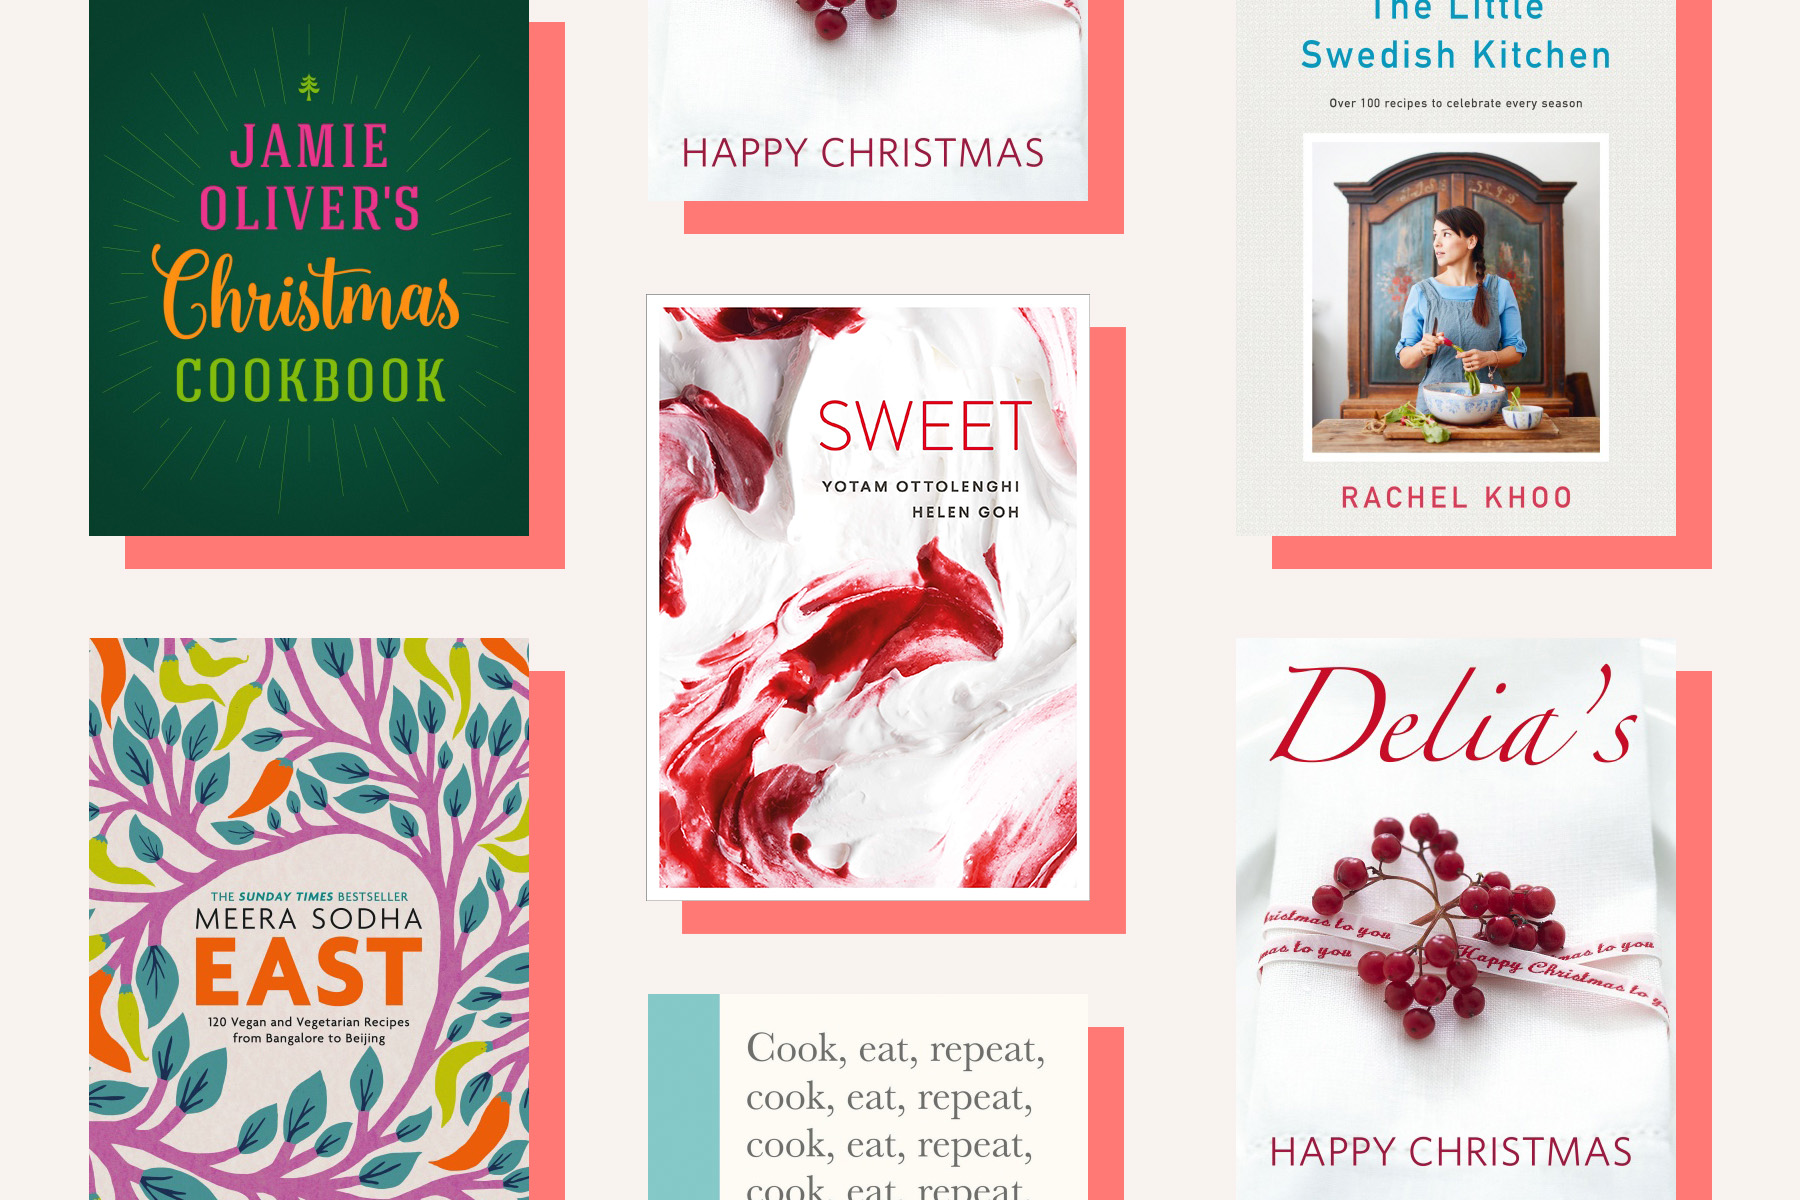 Covers of cookbooks including Jamie Oliver's Christmas Cookbook, Meera Sodha's East , Yotam Ottolenghi and Helen Goh's Sweet, Rachel Khoo's The Little Swedish Kitchen and Delia's Happy Christmas.